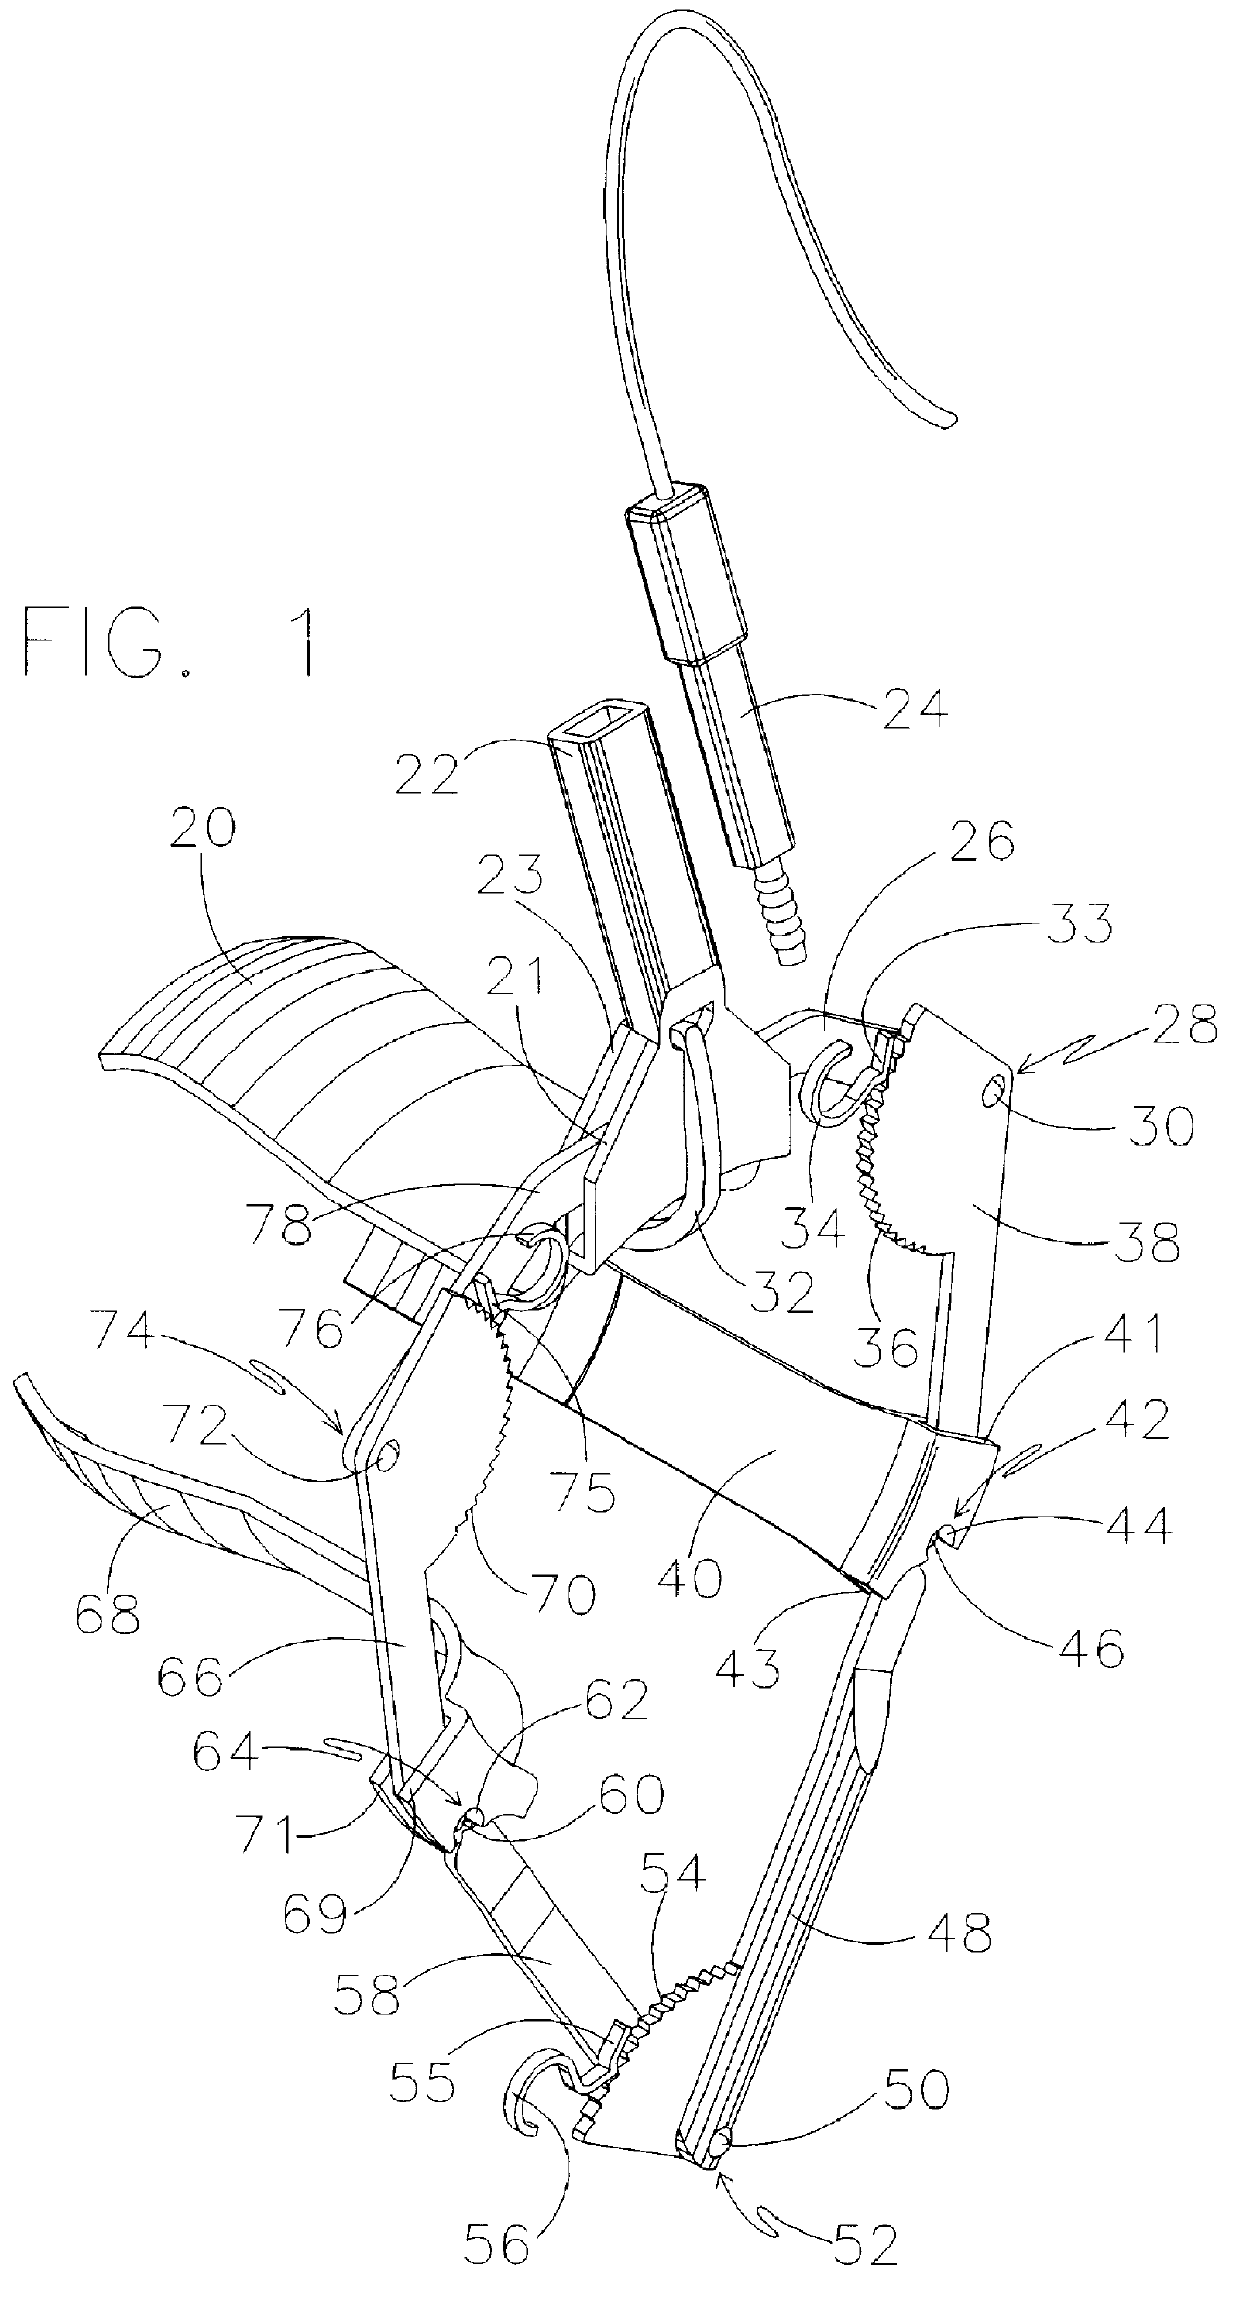 Multi-bladed speculum for dilating a body cavity